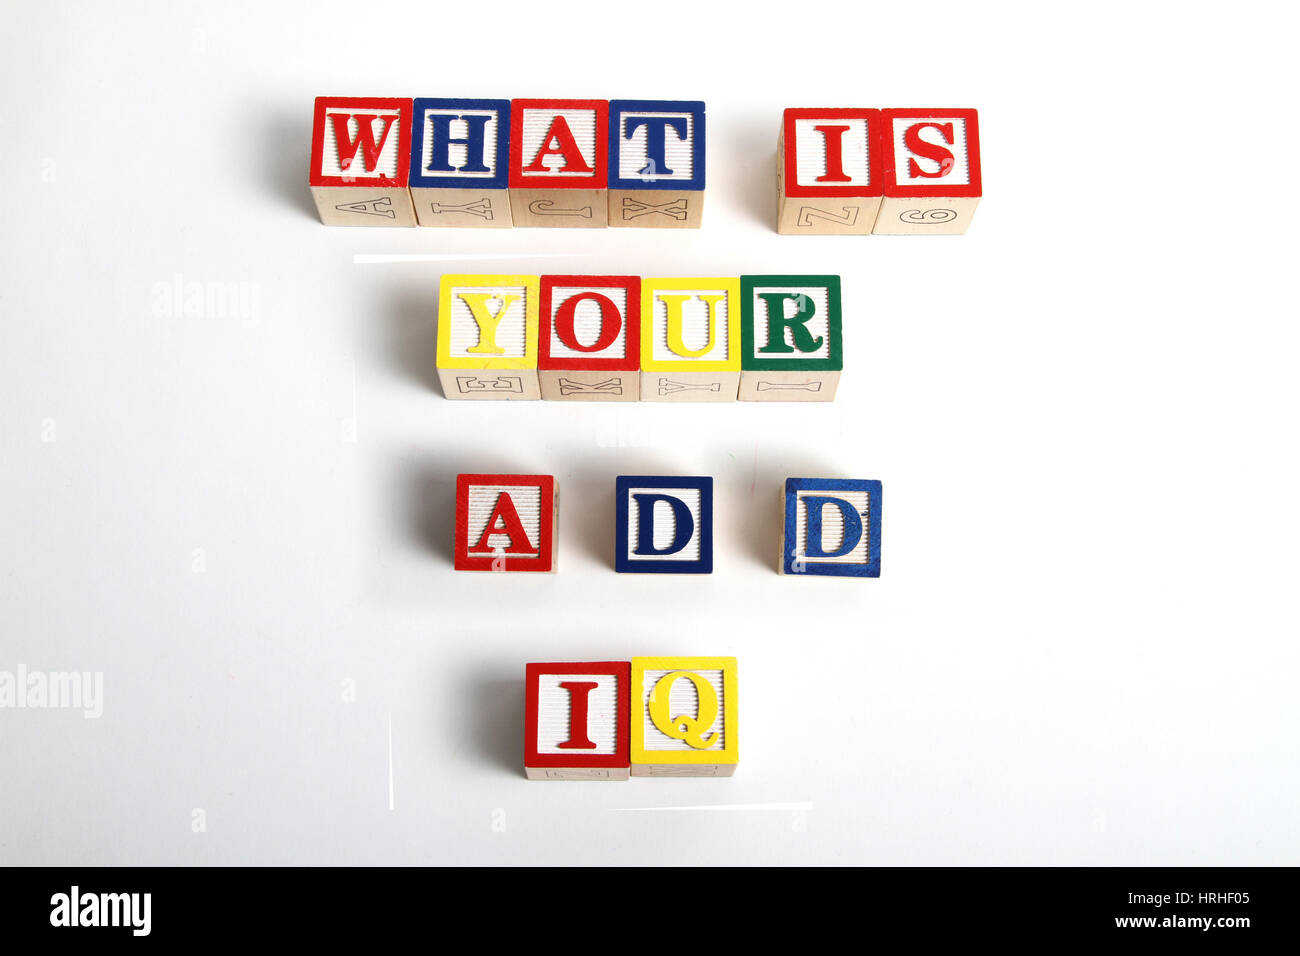 What Is Your A.D.D. IQ? Stock Photo